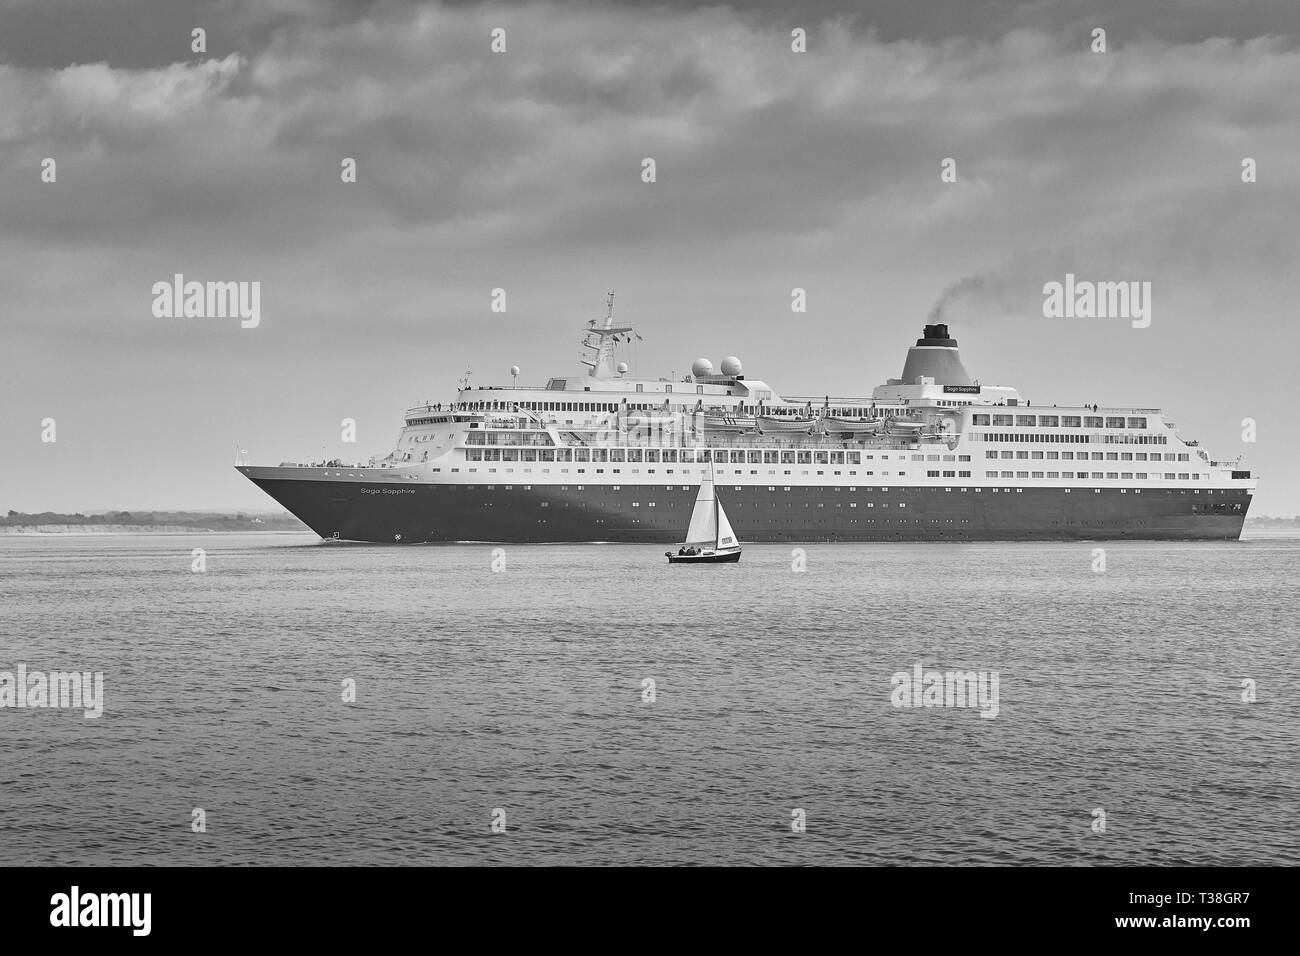 Black and White Photo Of The Saga Cruises Cruise Ship, Saga Sapphire, Approaches The Port Of Southampton, A Small Sailing Boat In Foreground. UK. Stock Photo